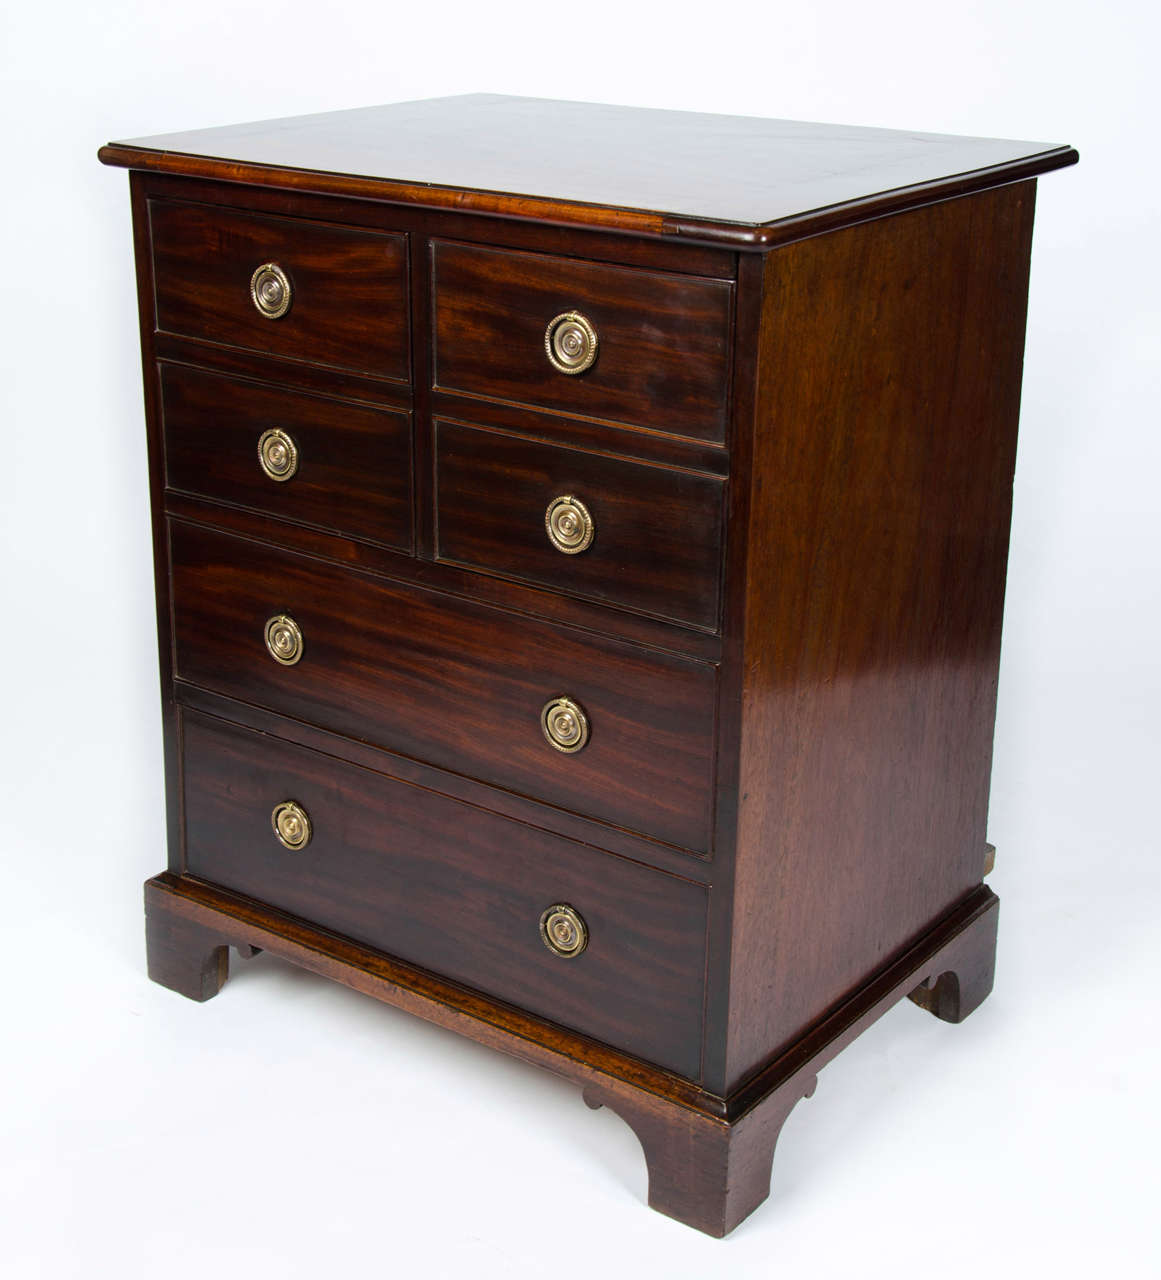 A wonderful George III period mahogany commode in outstanding condition, likely to never have been used.
The lift up top and doors open to reveal the seat and original cover, above a dummy and a fitted bottom drawer.
Of excellent colour and